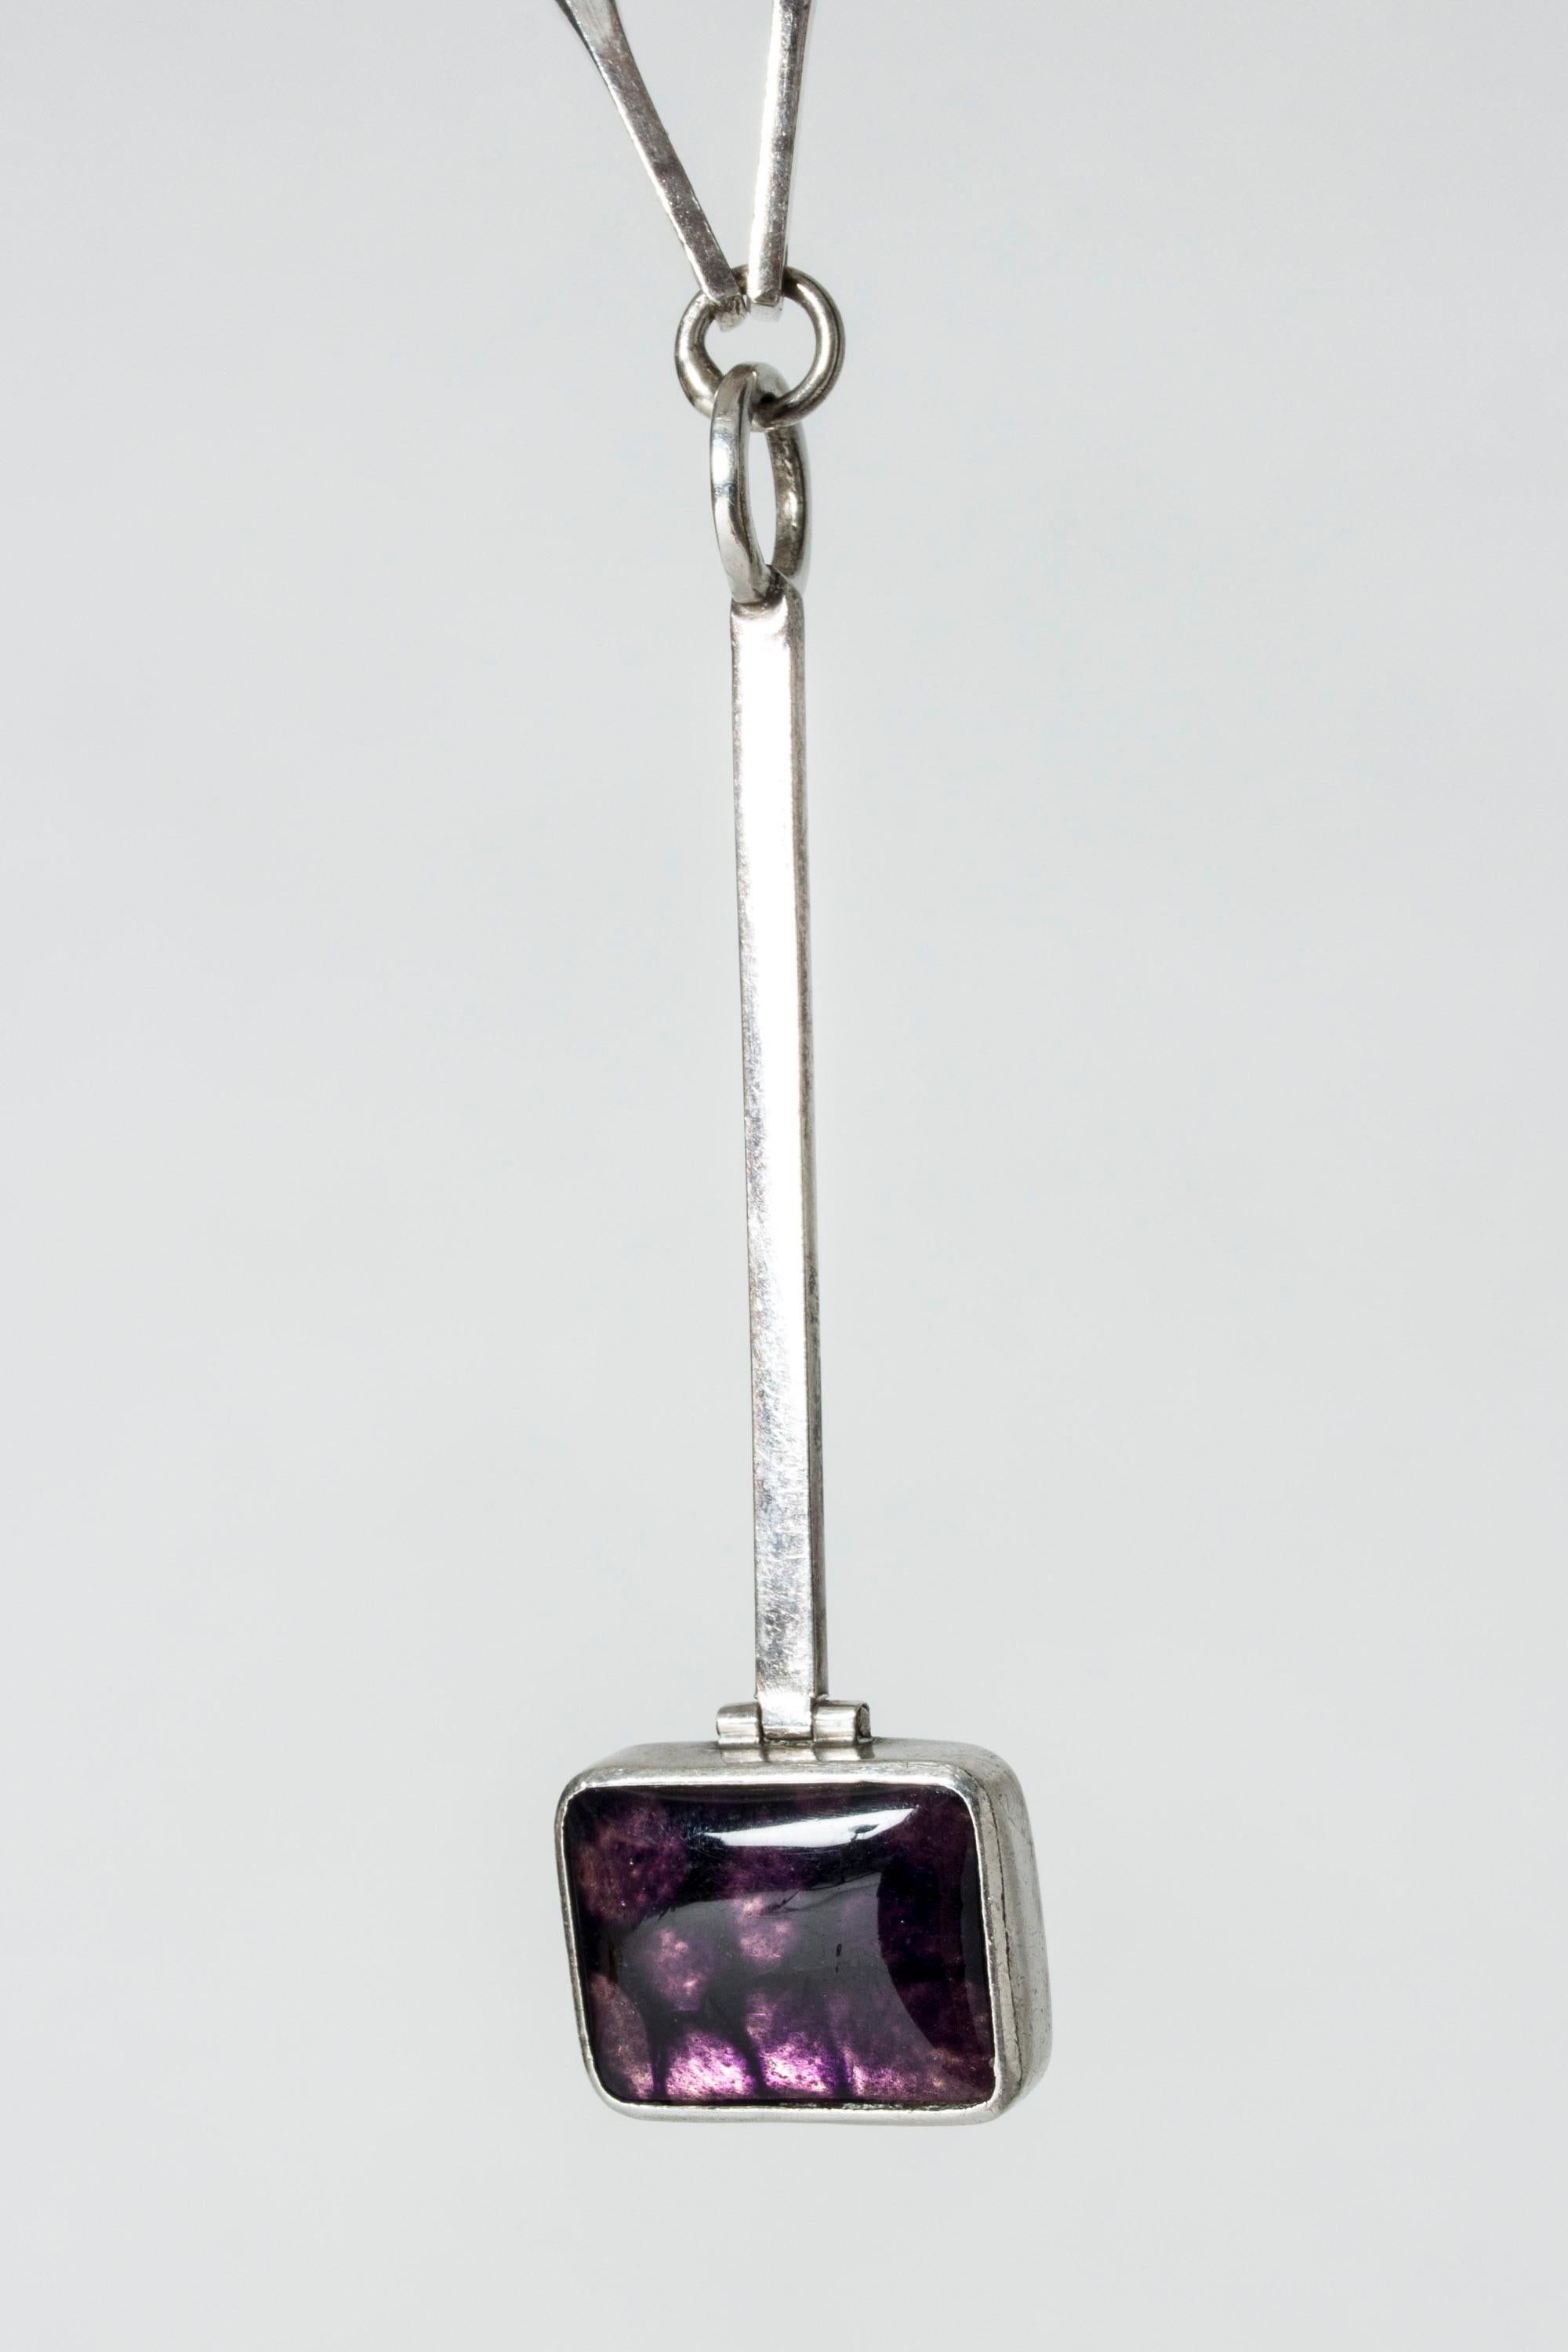 Beautiful Swedish 1950s silver collier, with purple enamel on the pendant. Cool, very nicely executed design, with irregular shaped chain links and elongated pendant. Beautiful pattern and depth in the enamel.